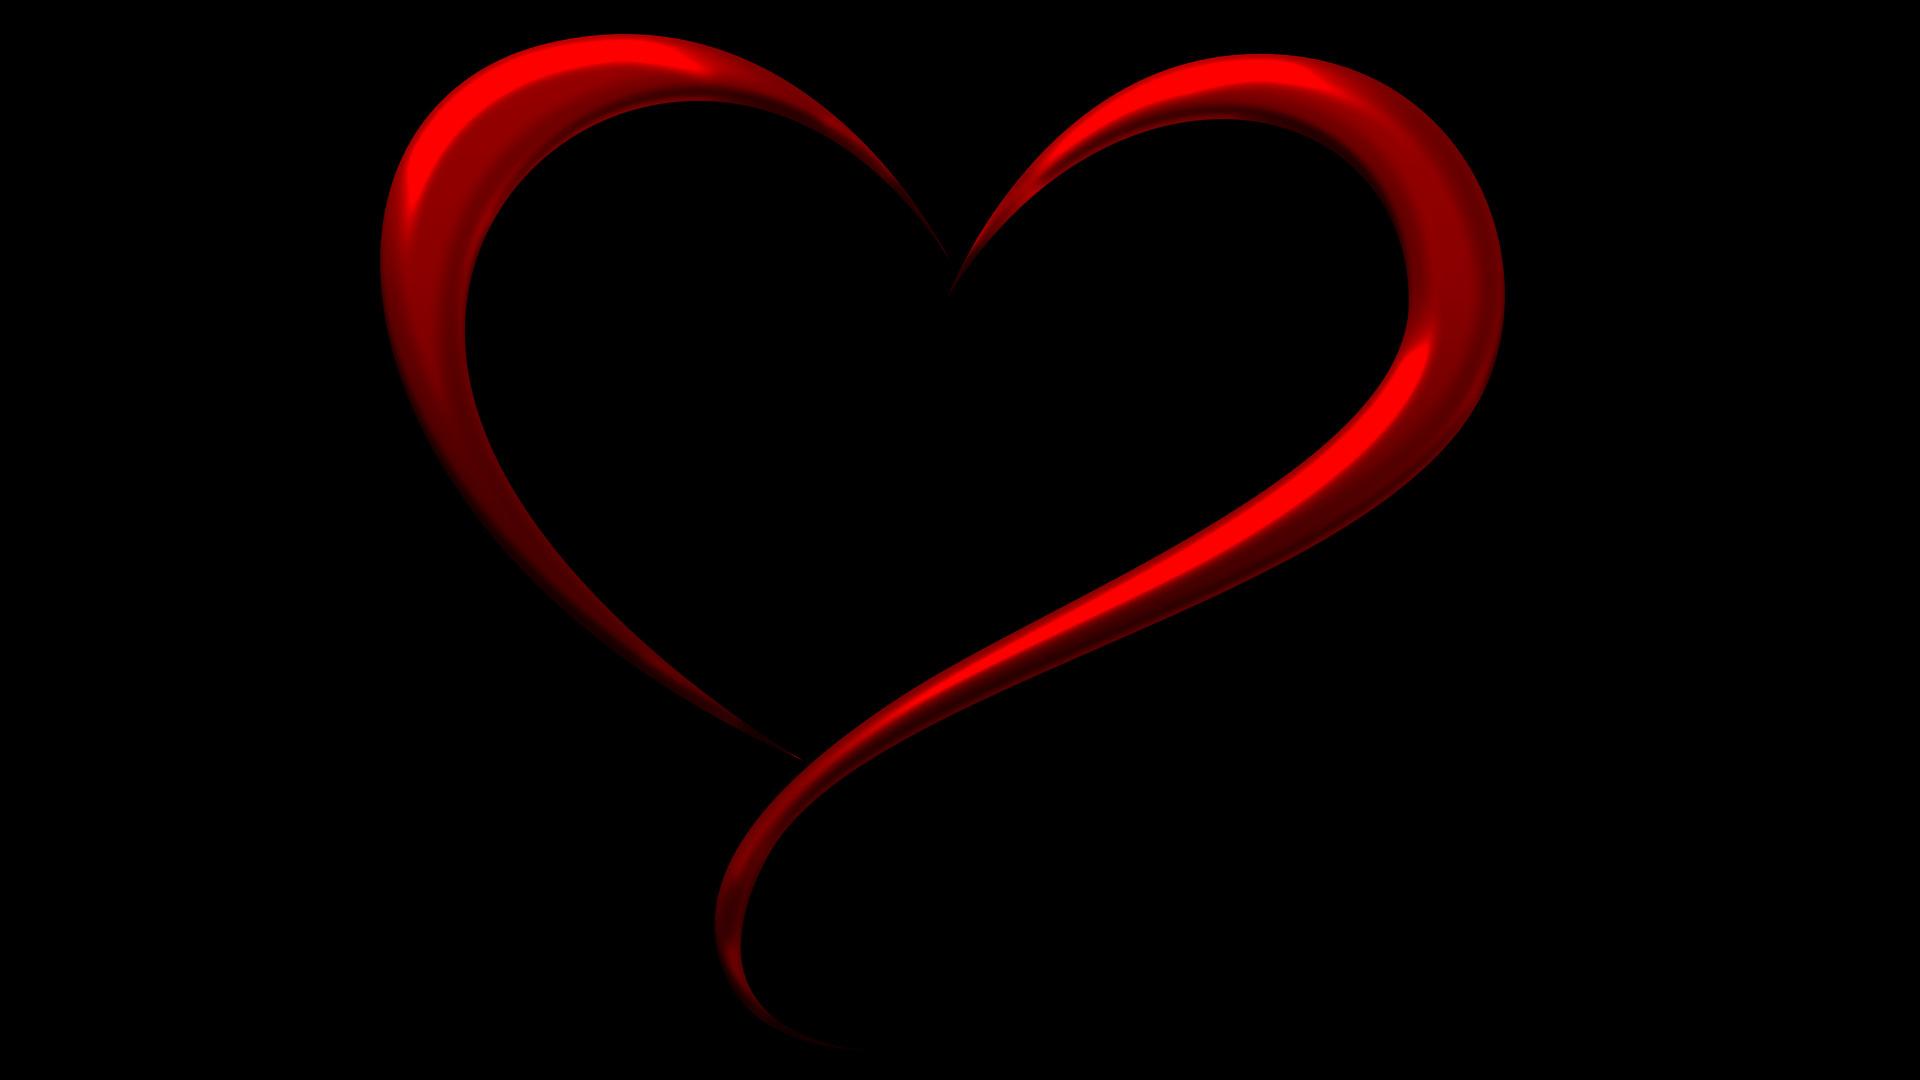 Black and Red Heart Wallpapers - Top Free Black and Red Heart ...